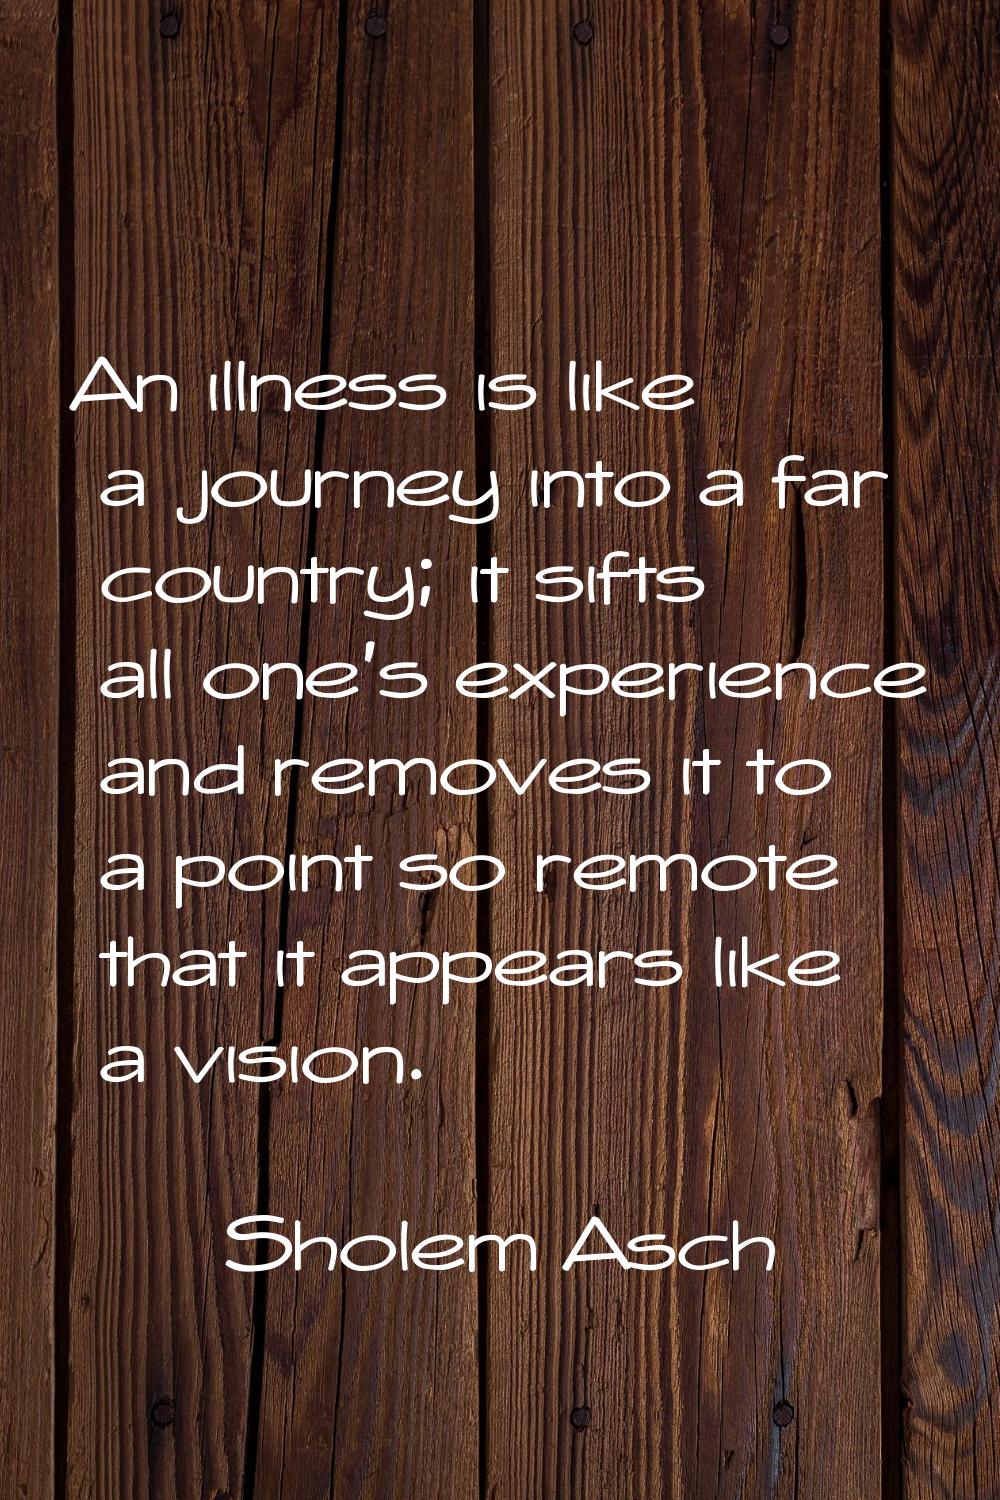 An illness is like a journey into a far country; it sifts all one's experience and removes it to a 